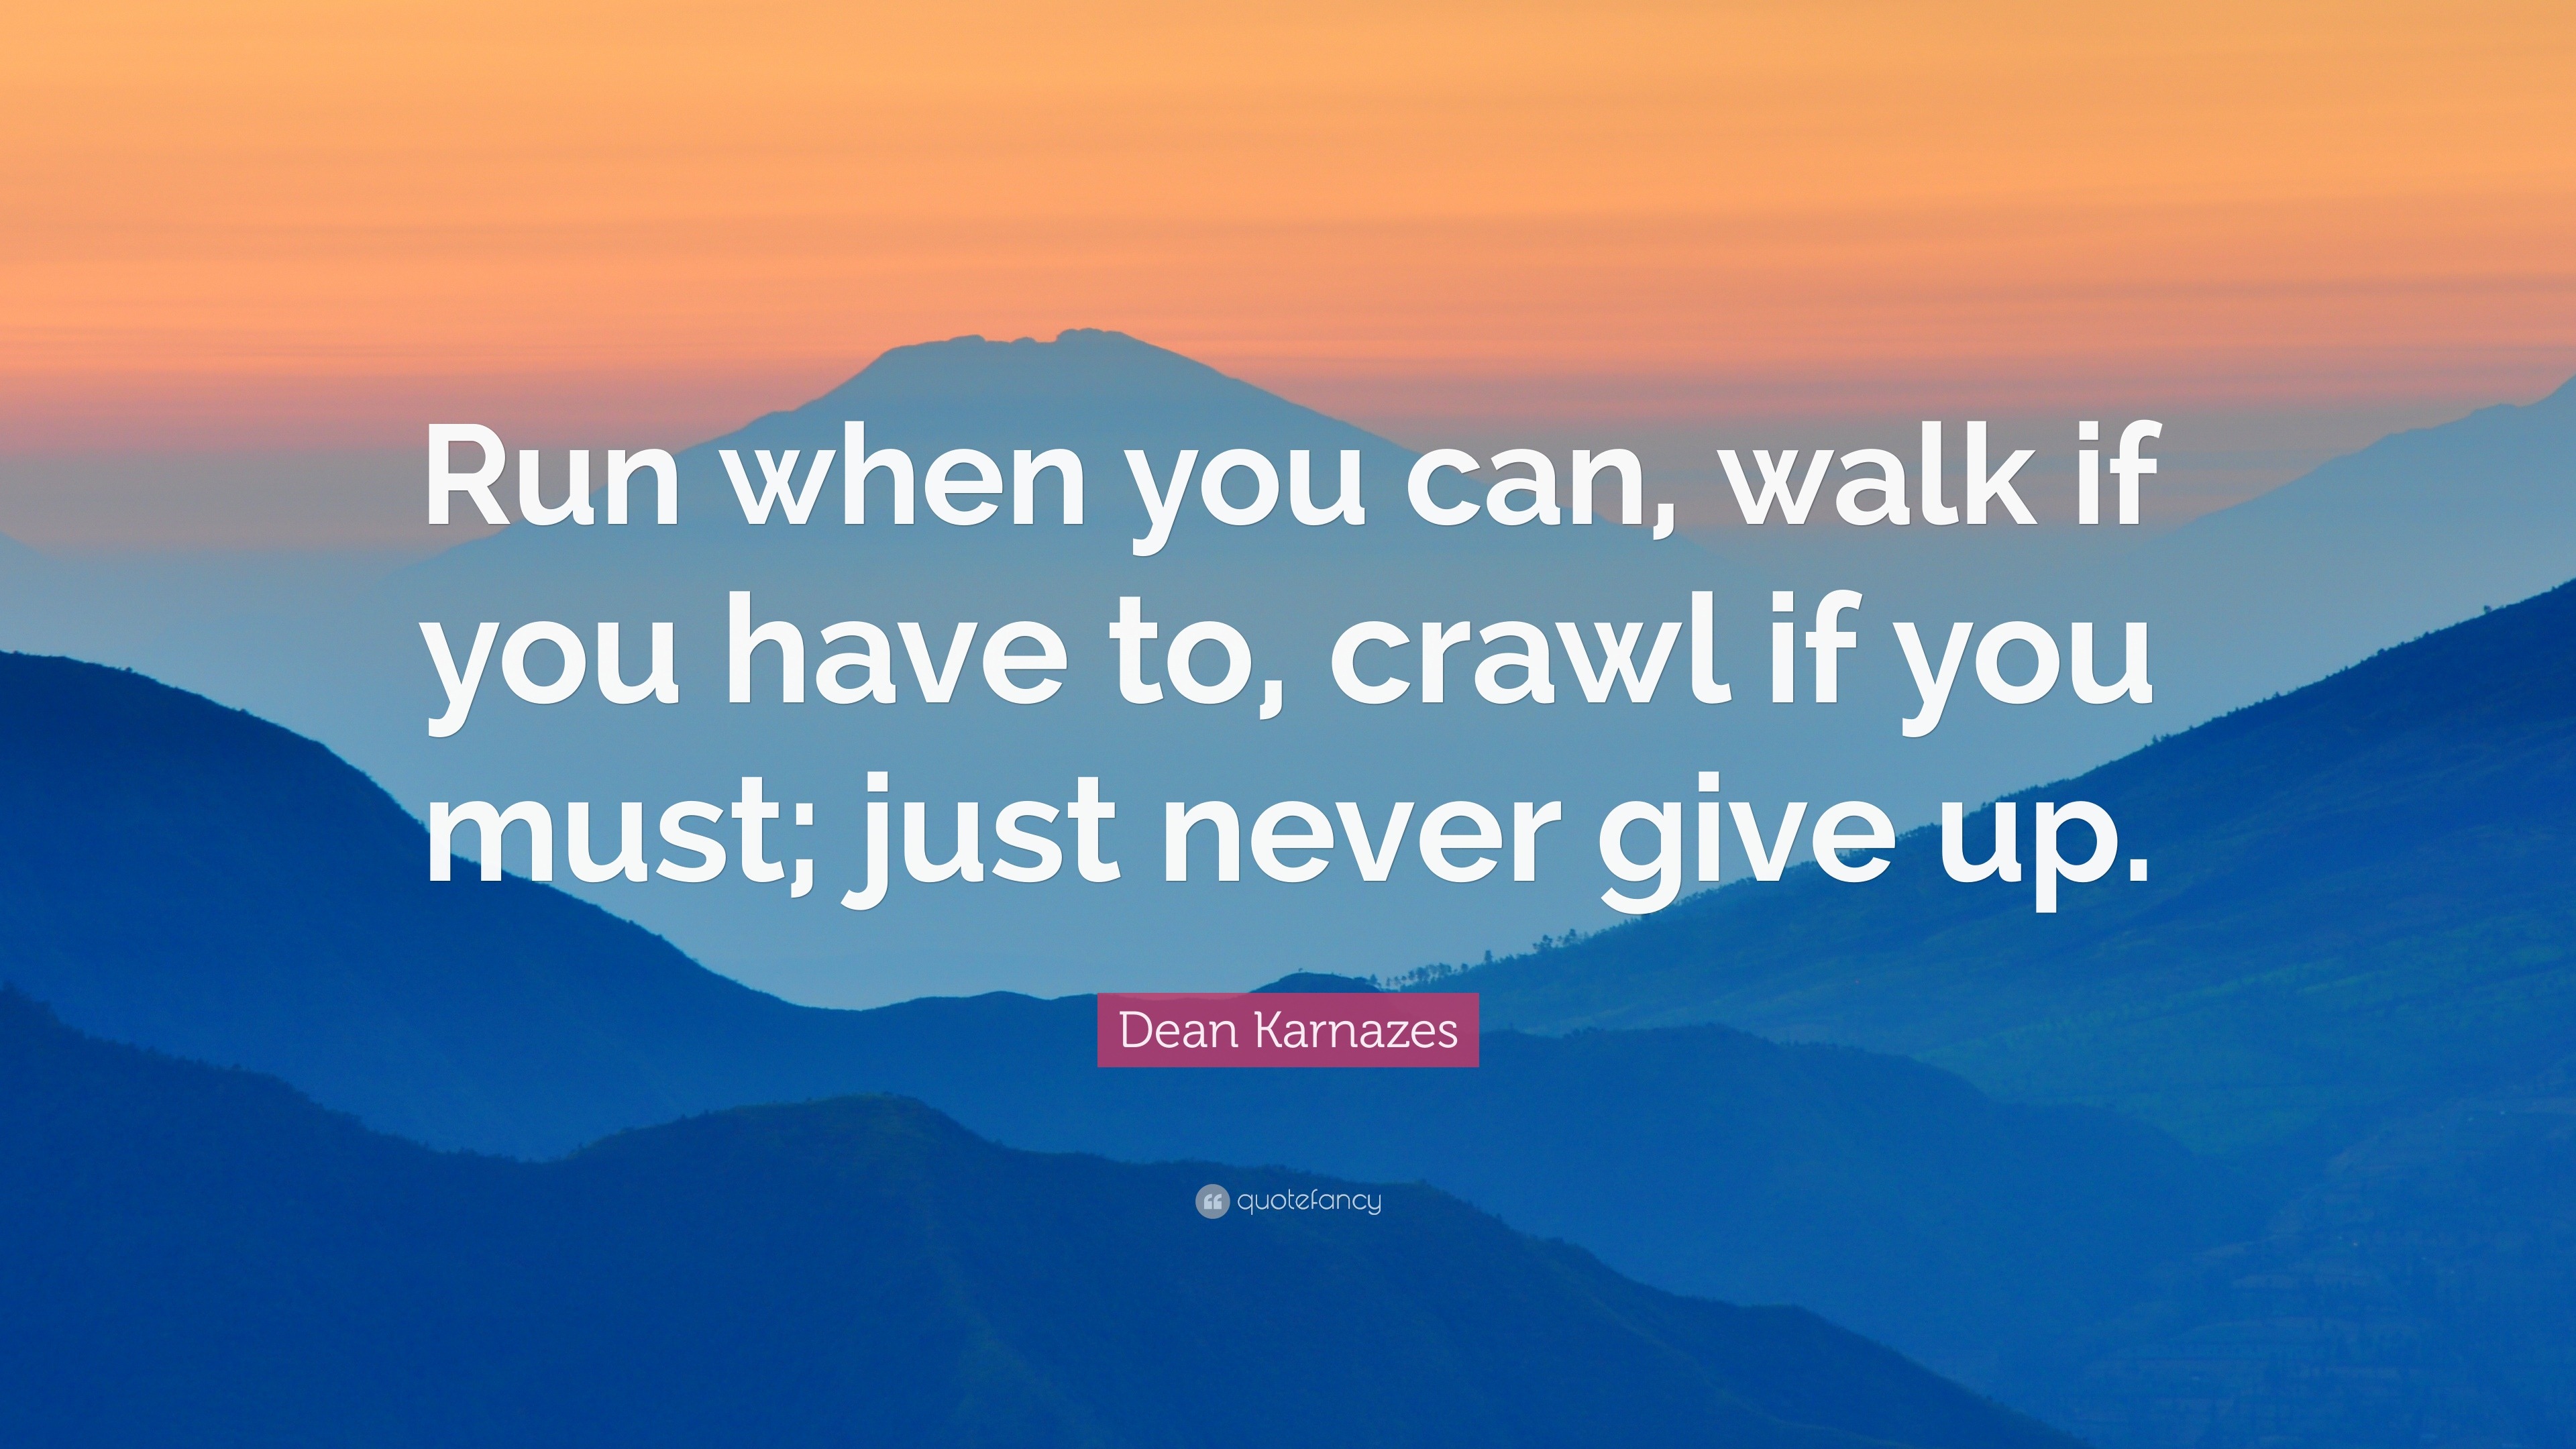 Dean Karnazes Quote: “Run when you can, walk if you have to, crawl if